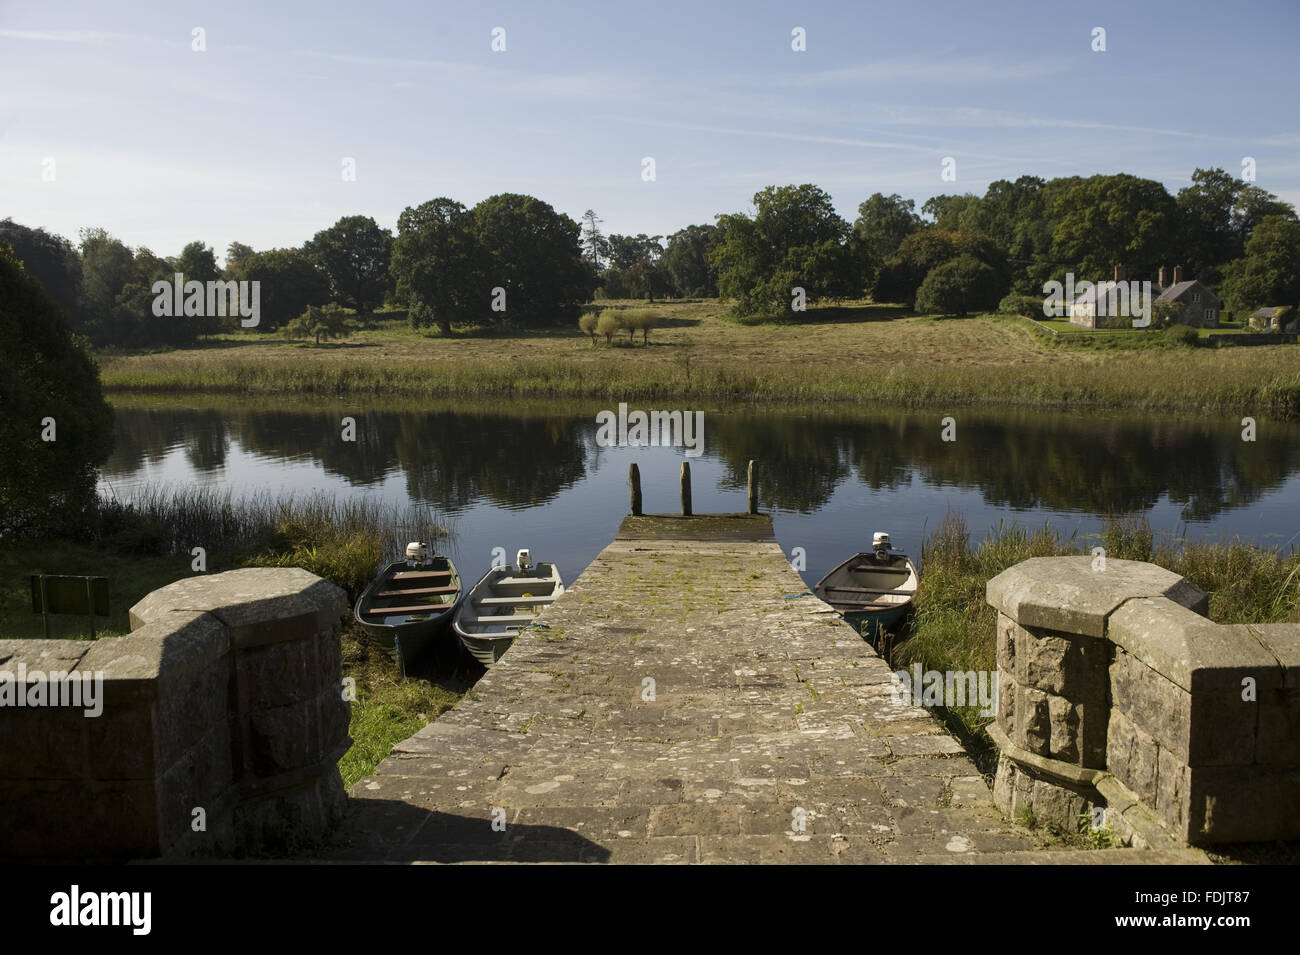 The view down the slipway of the boathouse on Lough Erne at Crom, Co. Fermanagh, Northern Ireland. Stock Photo